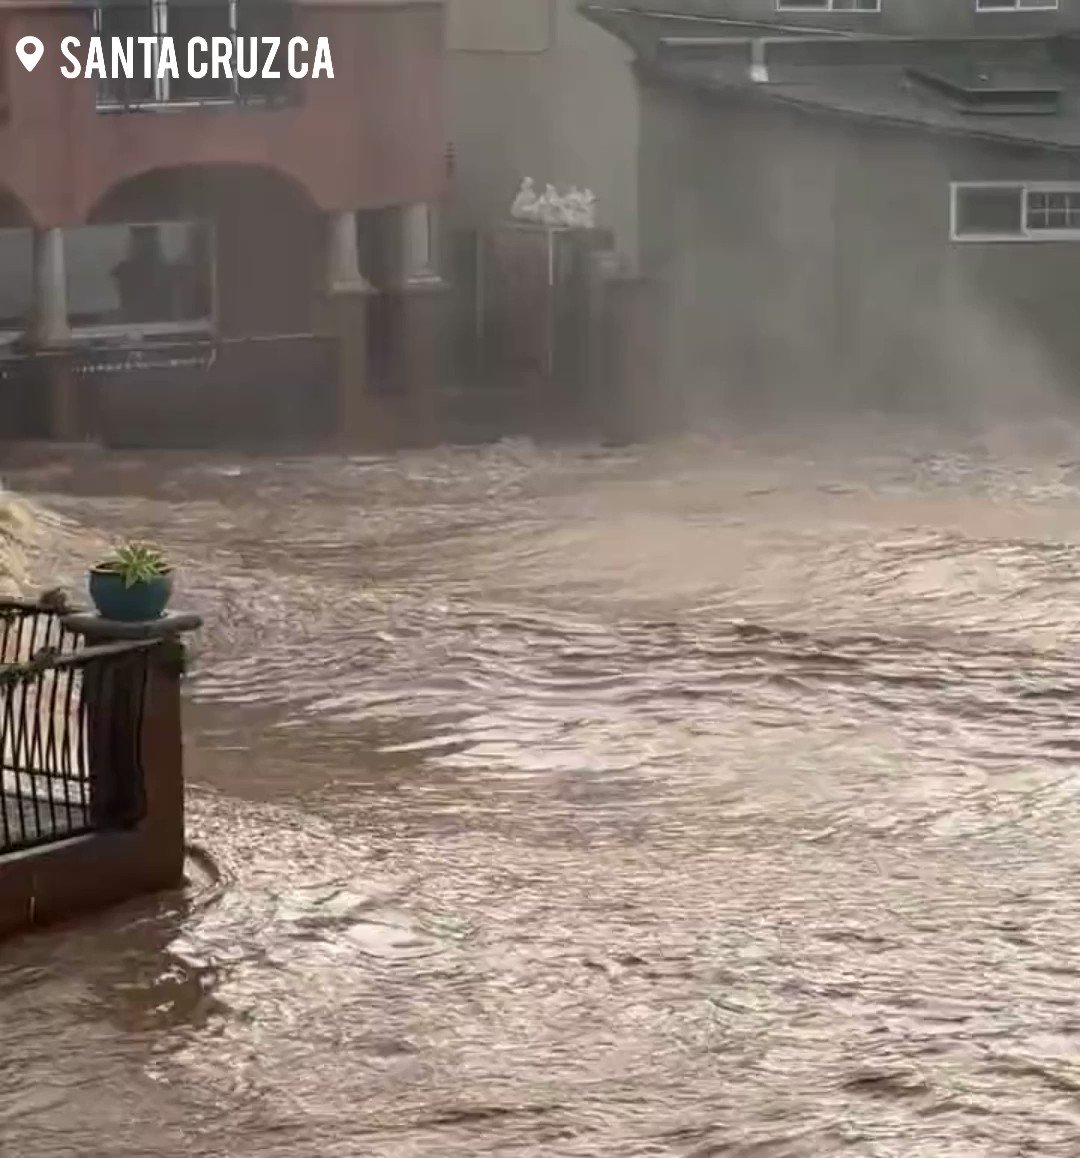 Major Damage reported as massive swell batters piers and homes  Santacruz   CA   Santa Cruz is reporting significant damage to piers homes and other structures as a powerful bomb cyclone continues to bear down on the coastal city bringing  waves and winds